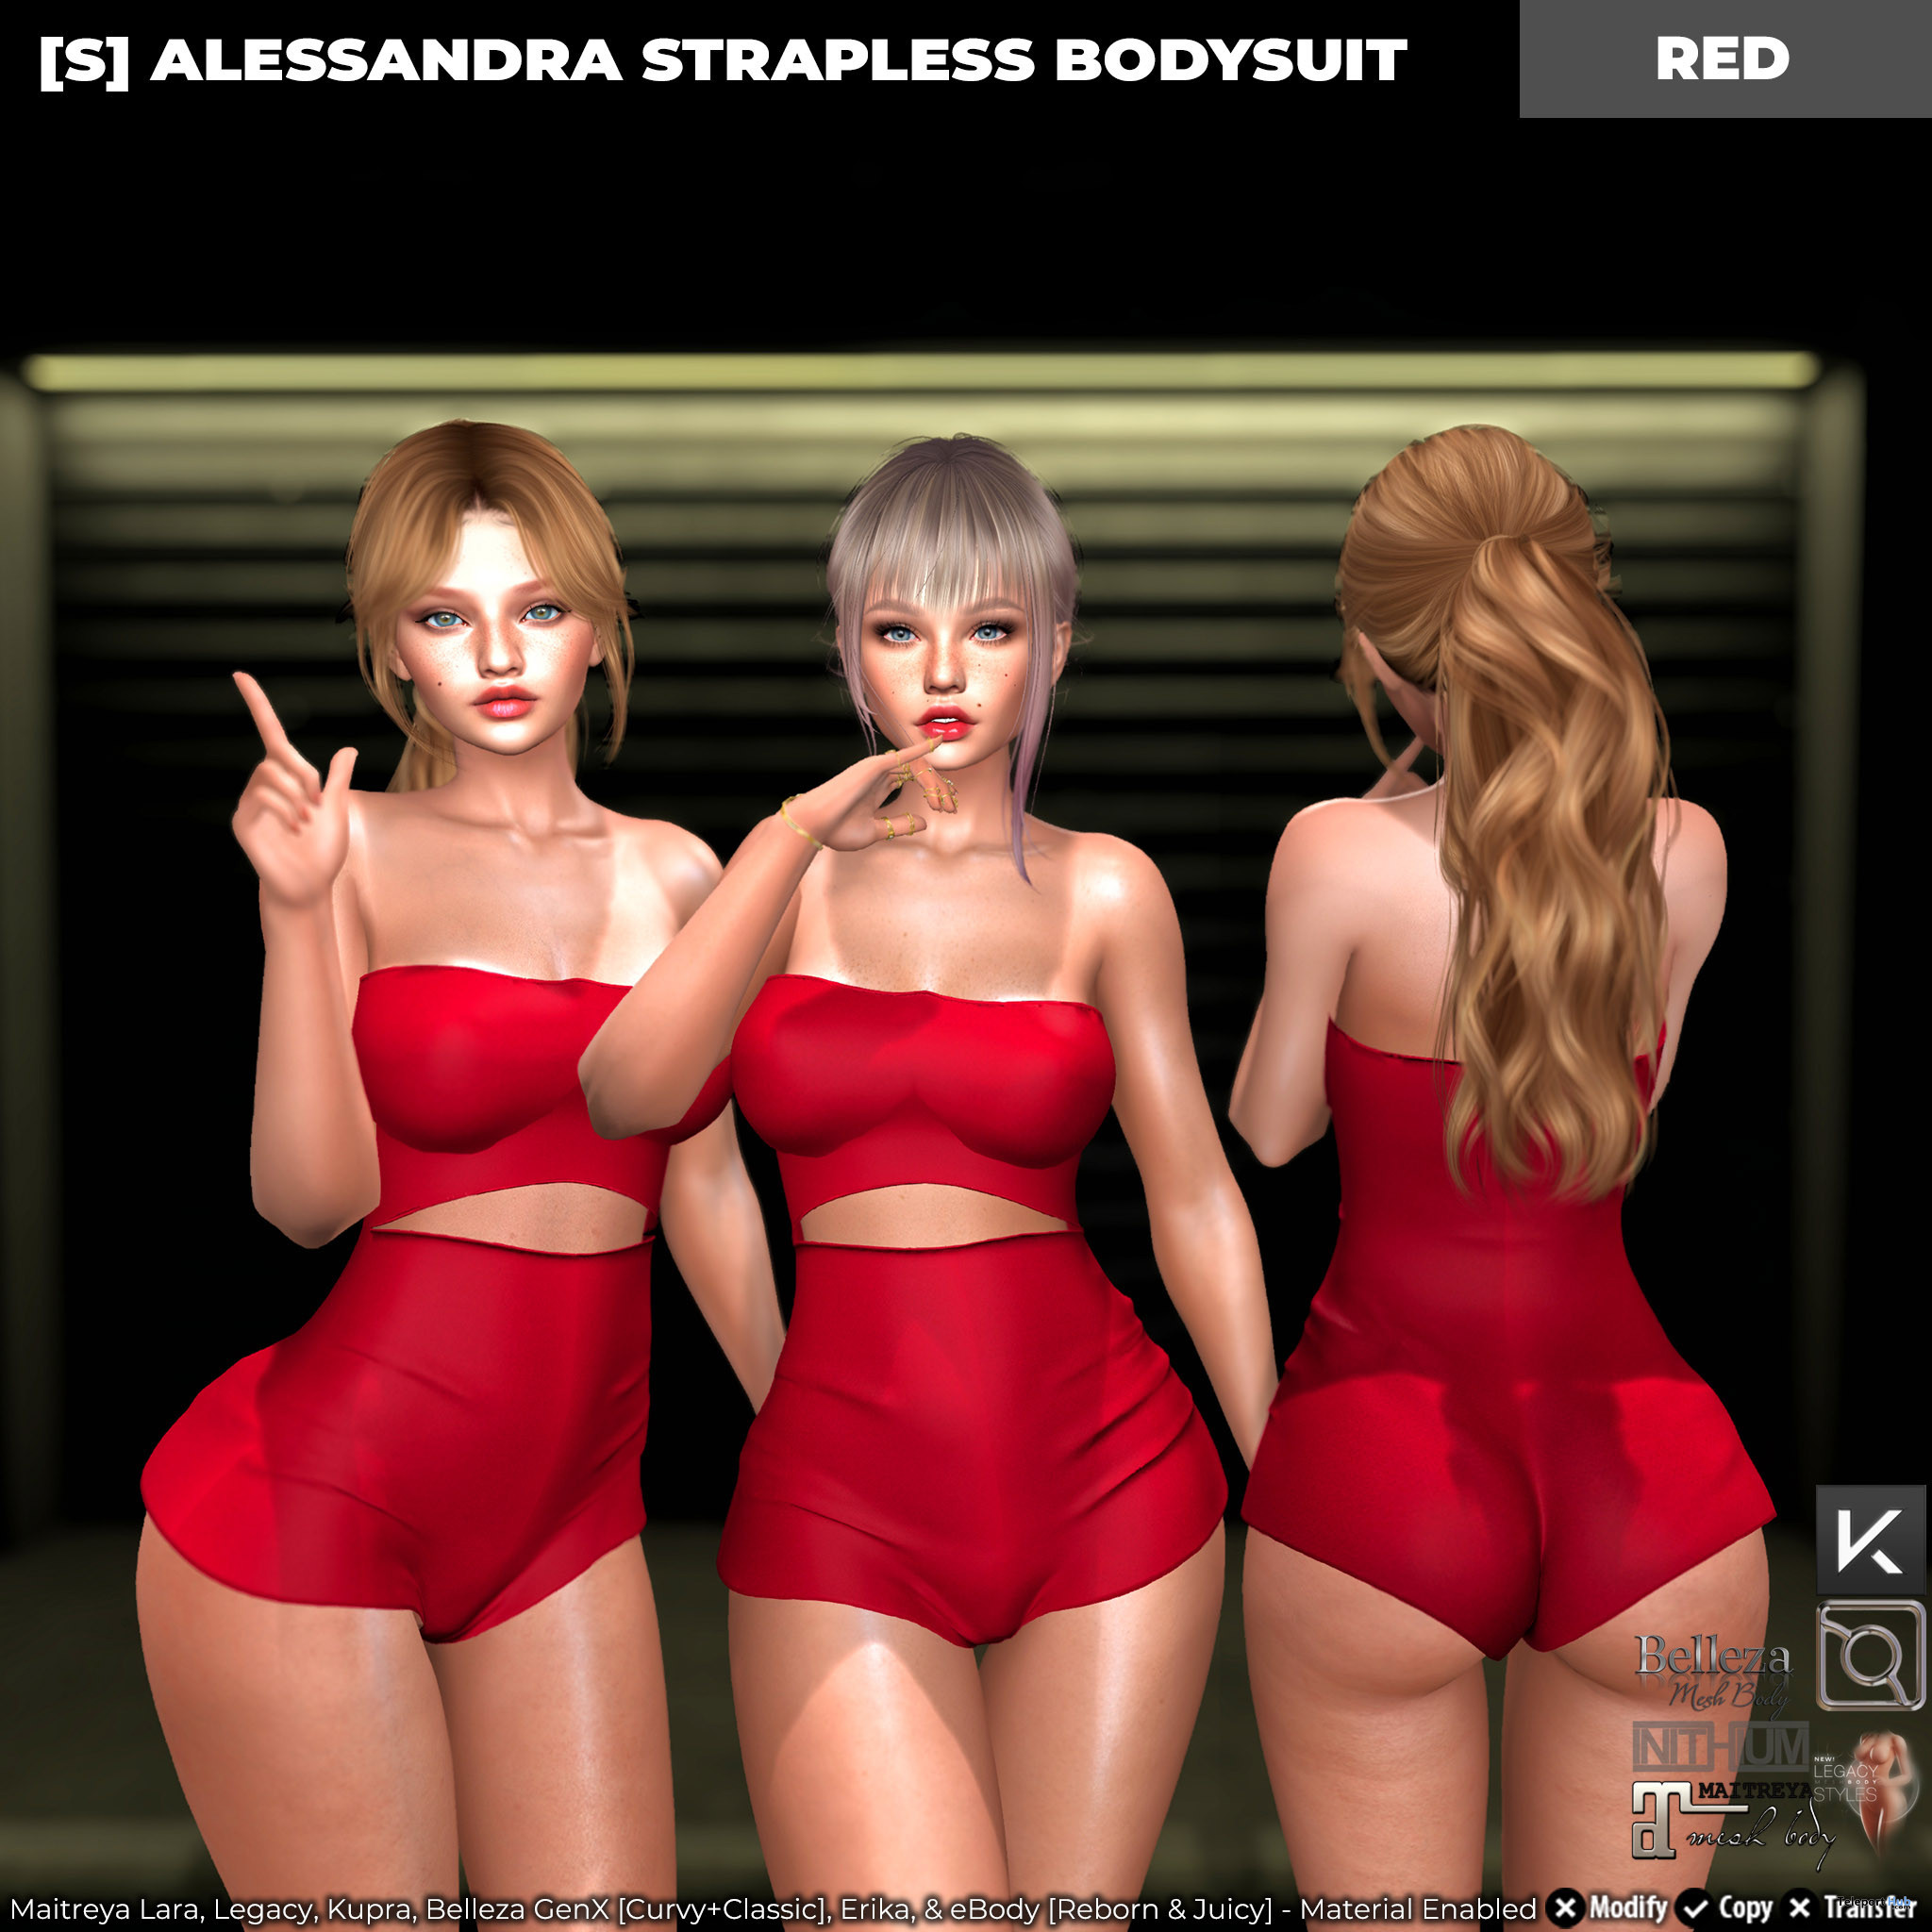 New Release: [S] Alessandra Strapless Bodysuit by [satus Inc]